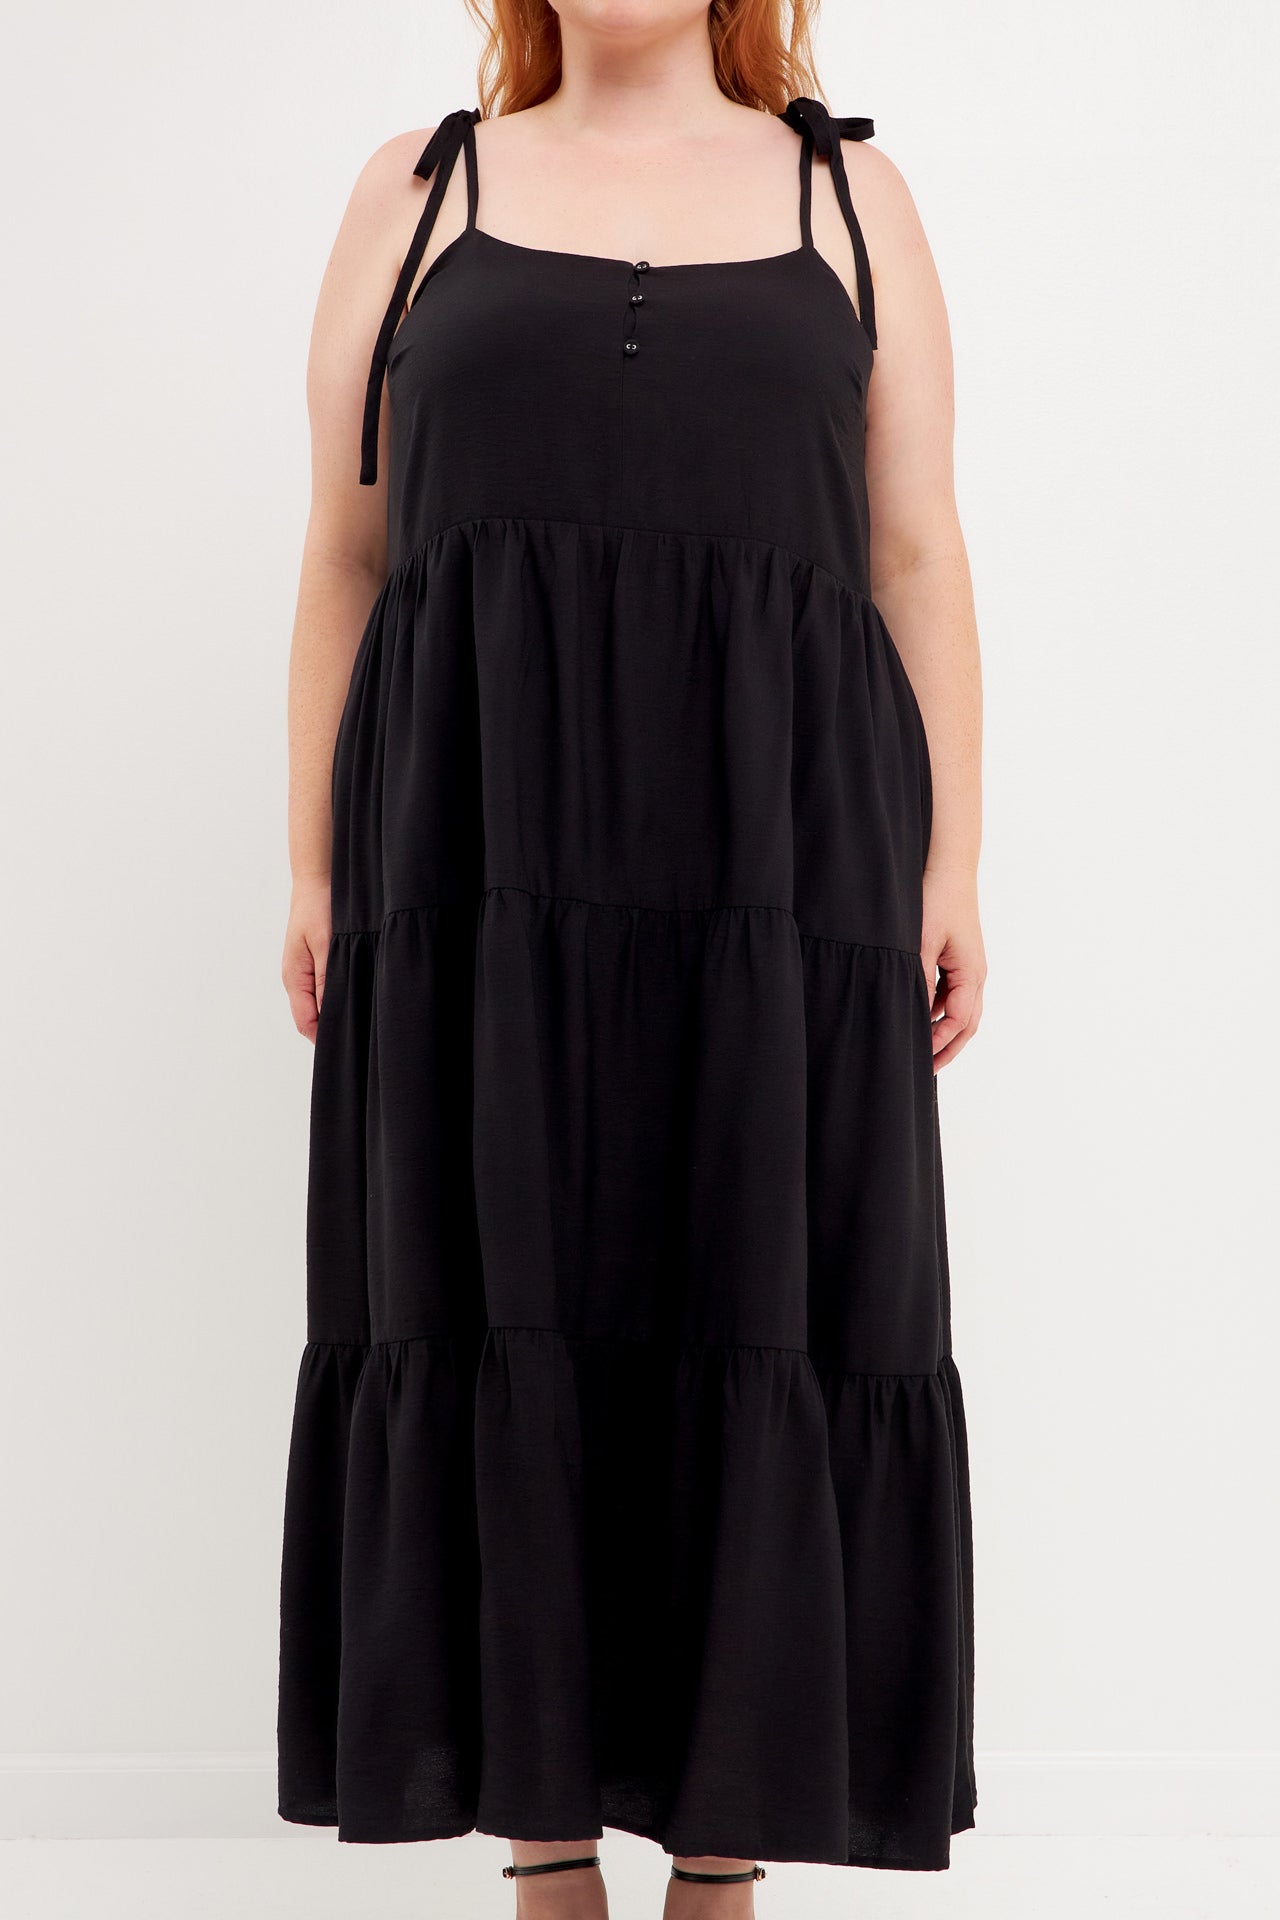 ENGLISH FACTORY - Spaghetti Tie Tiered Maxi Dress - DRESSES available at Objectrare